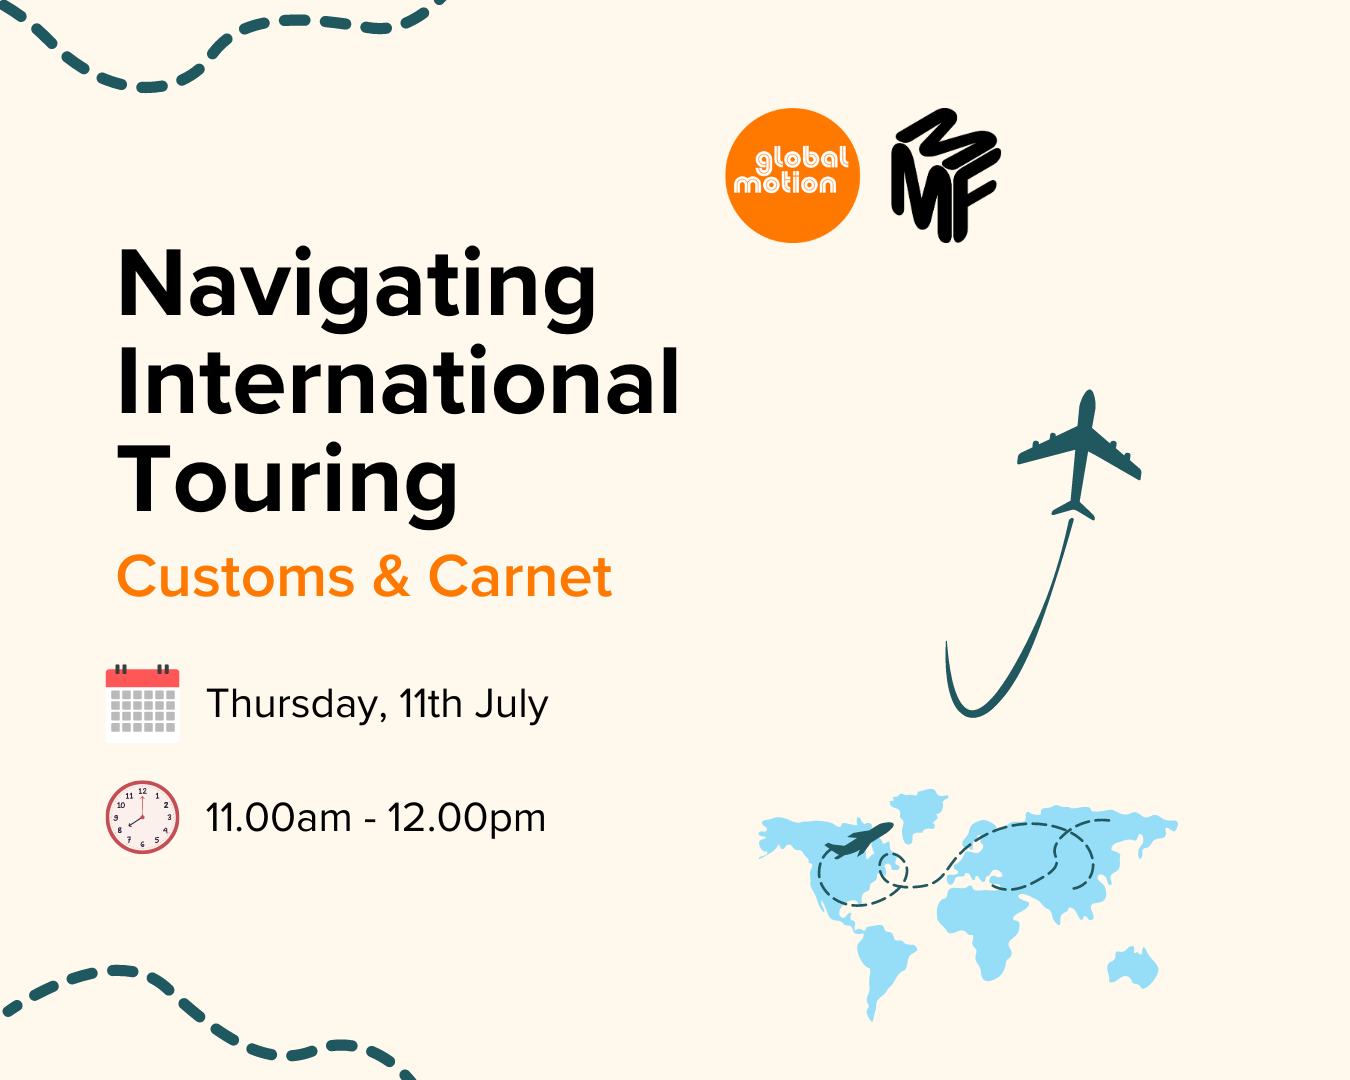 Navigating International Touring: Customs & Carnets with Global Motion